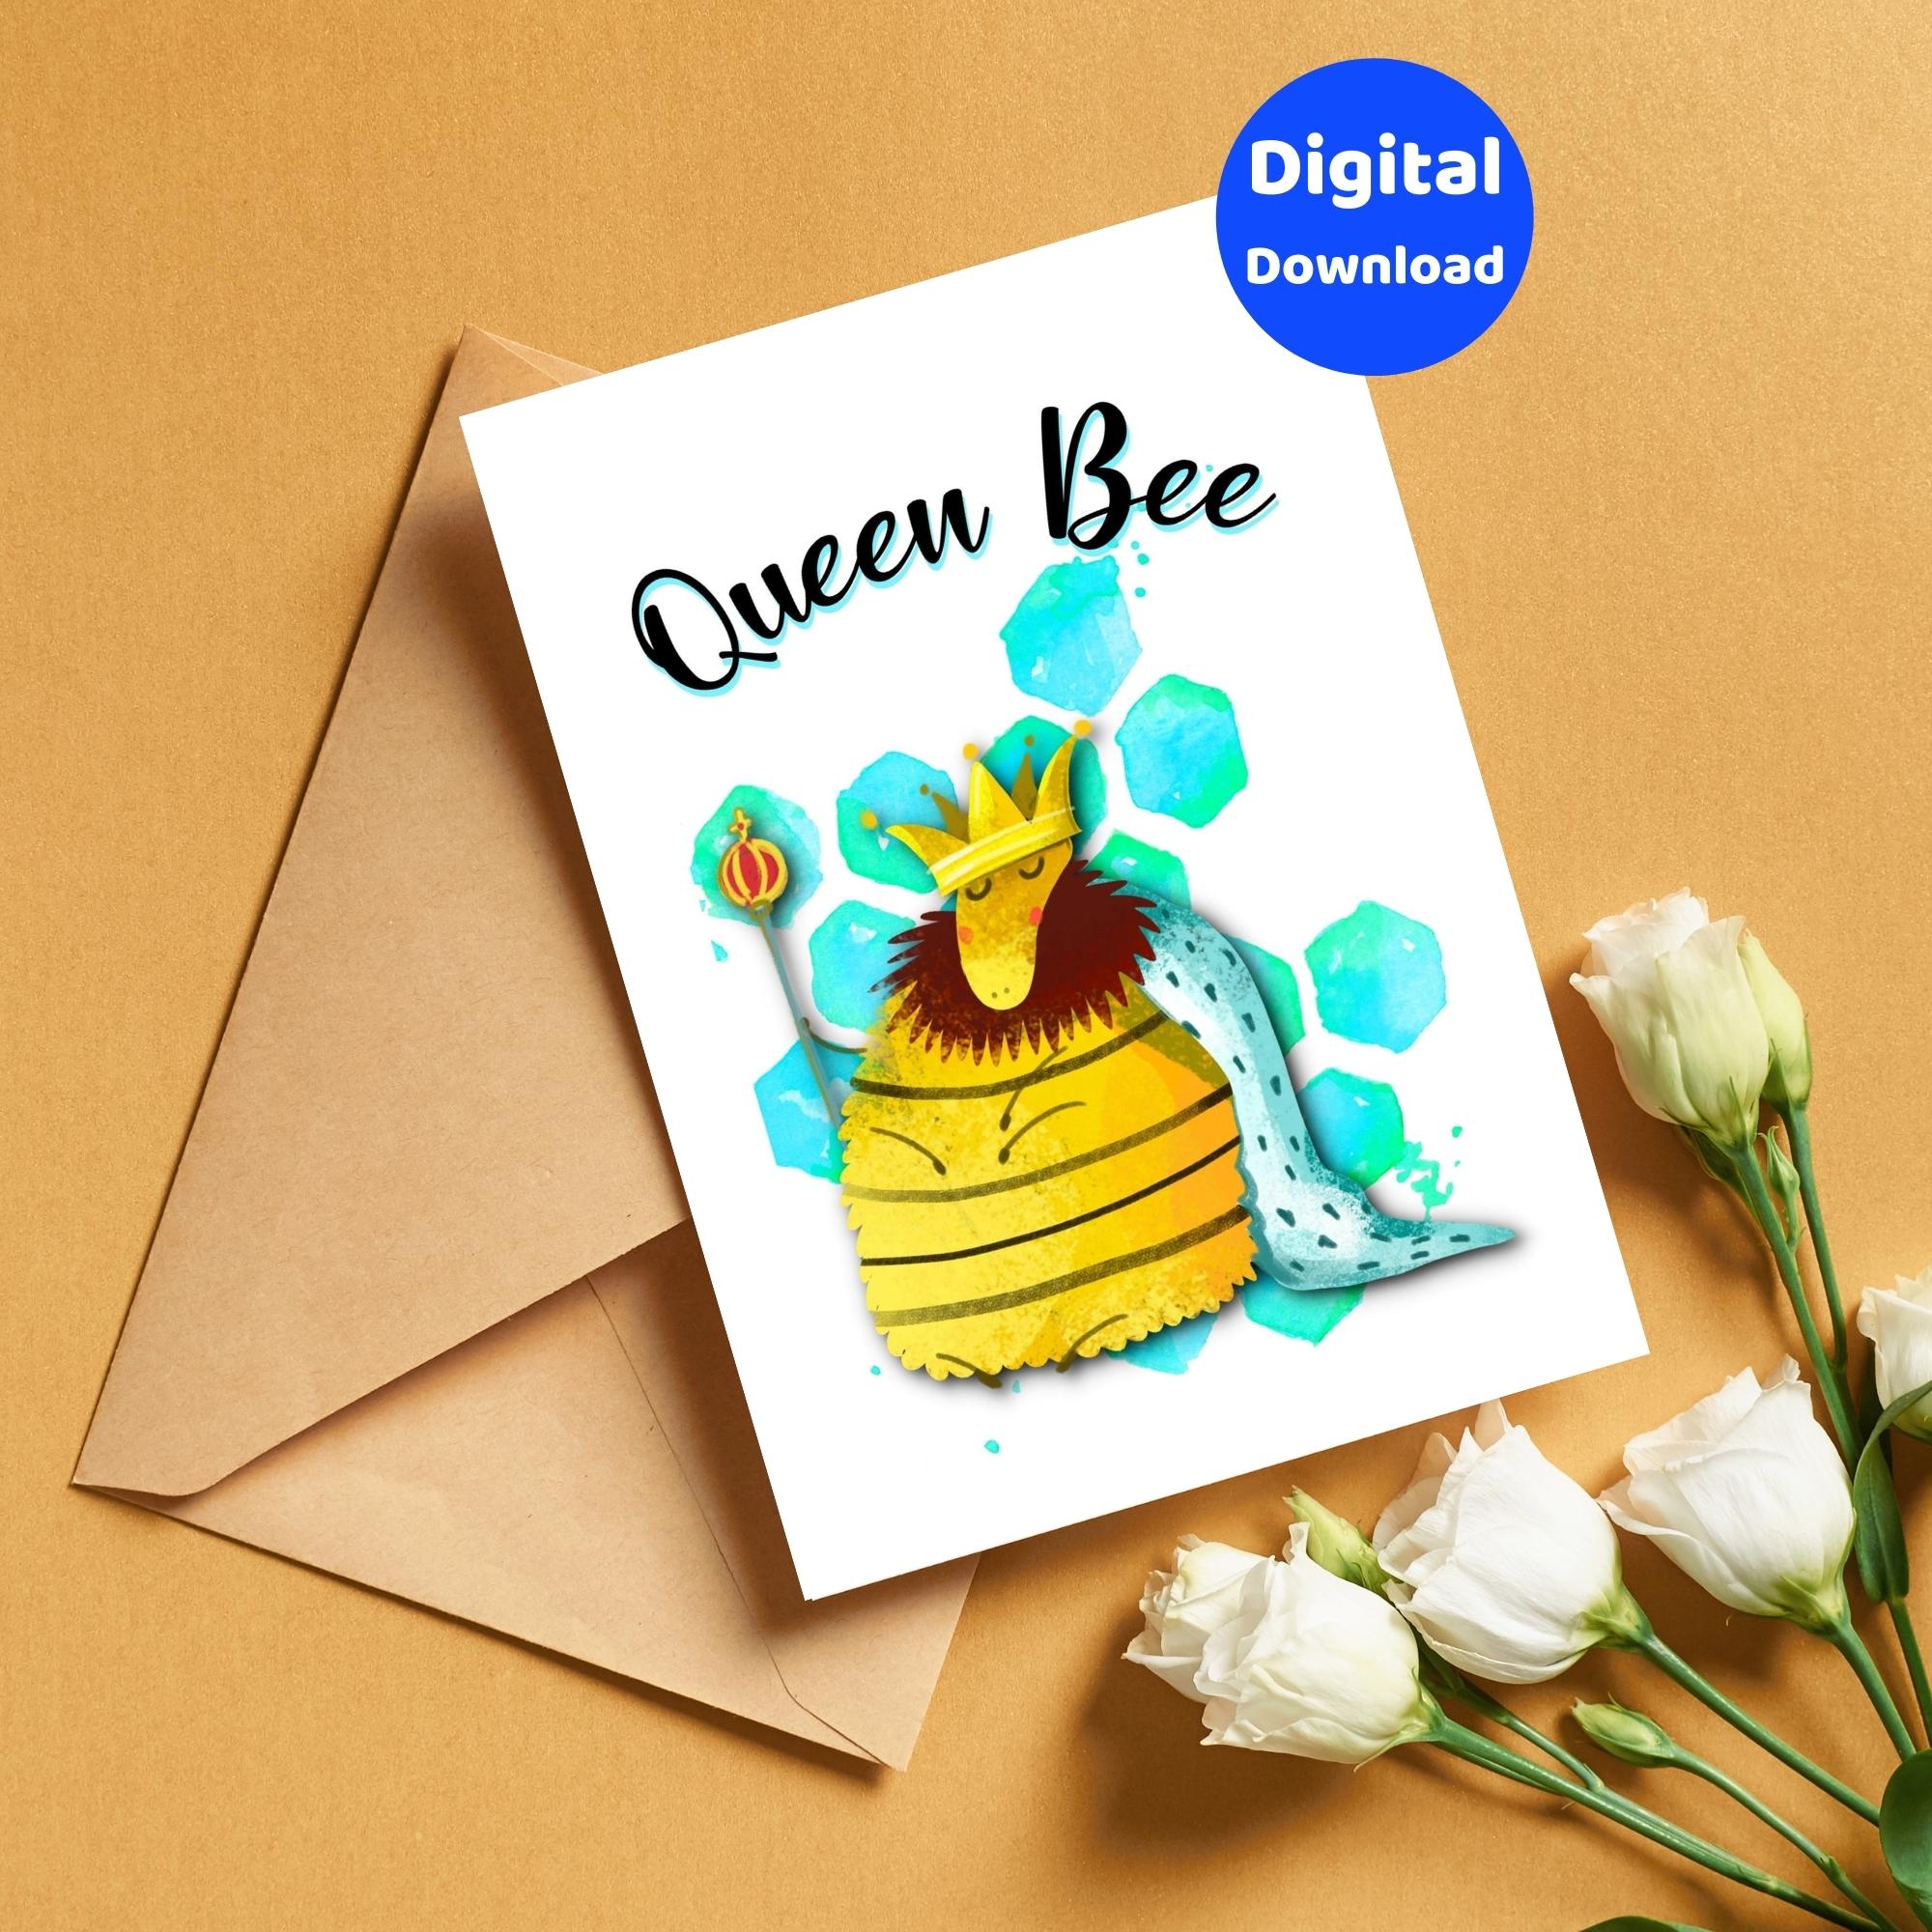 A printable bee greeting card with the sentiment "Queen Bee".